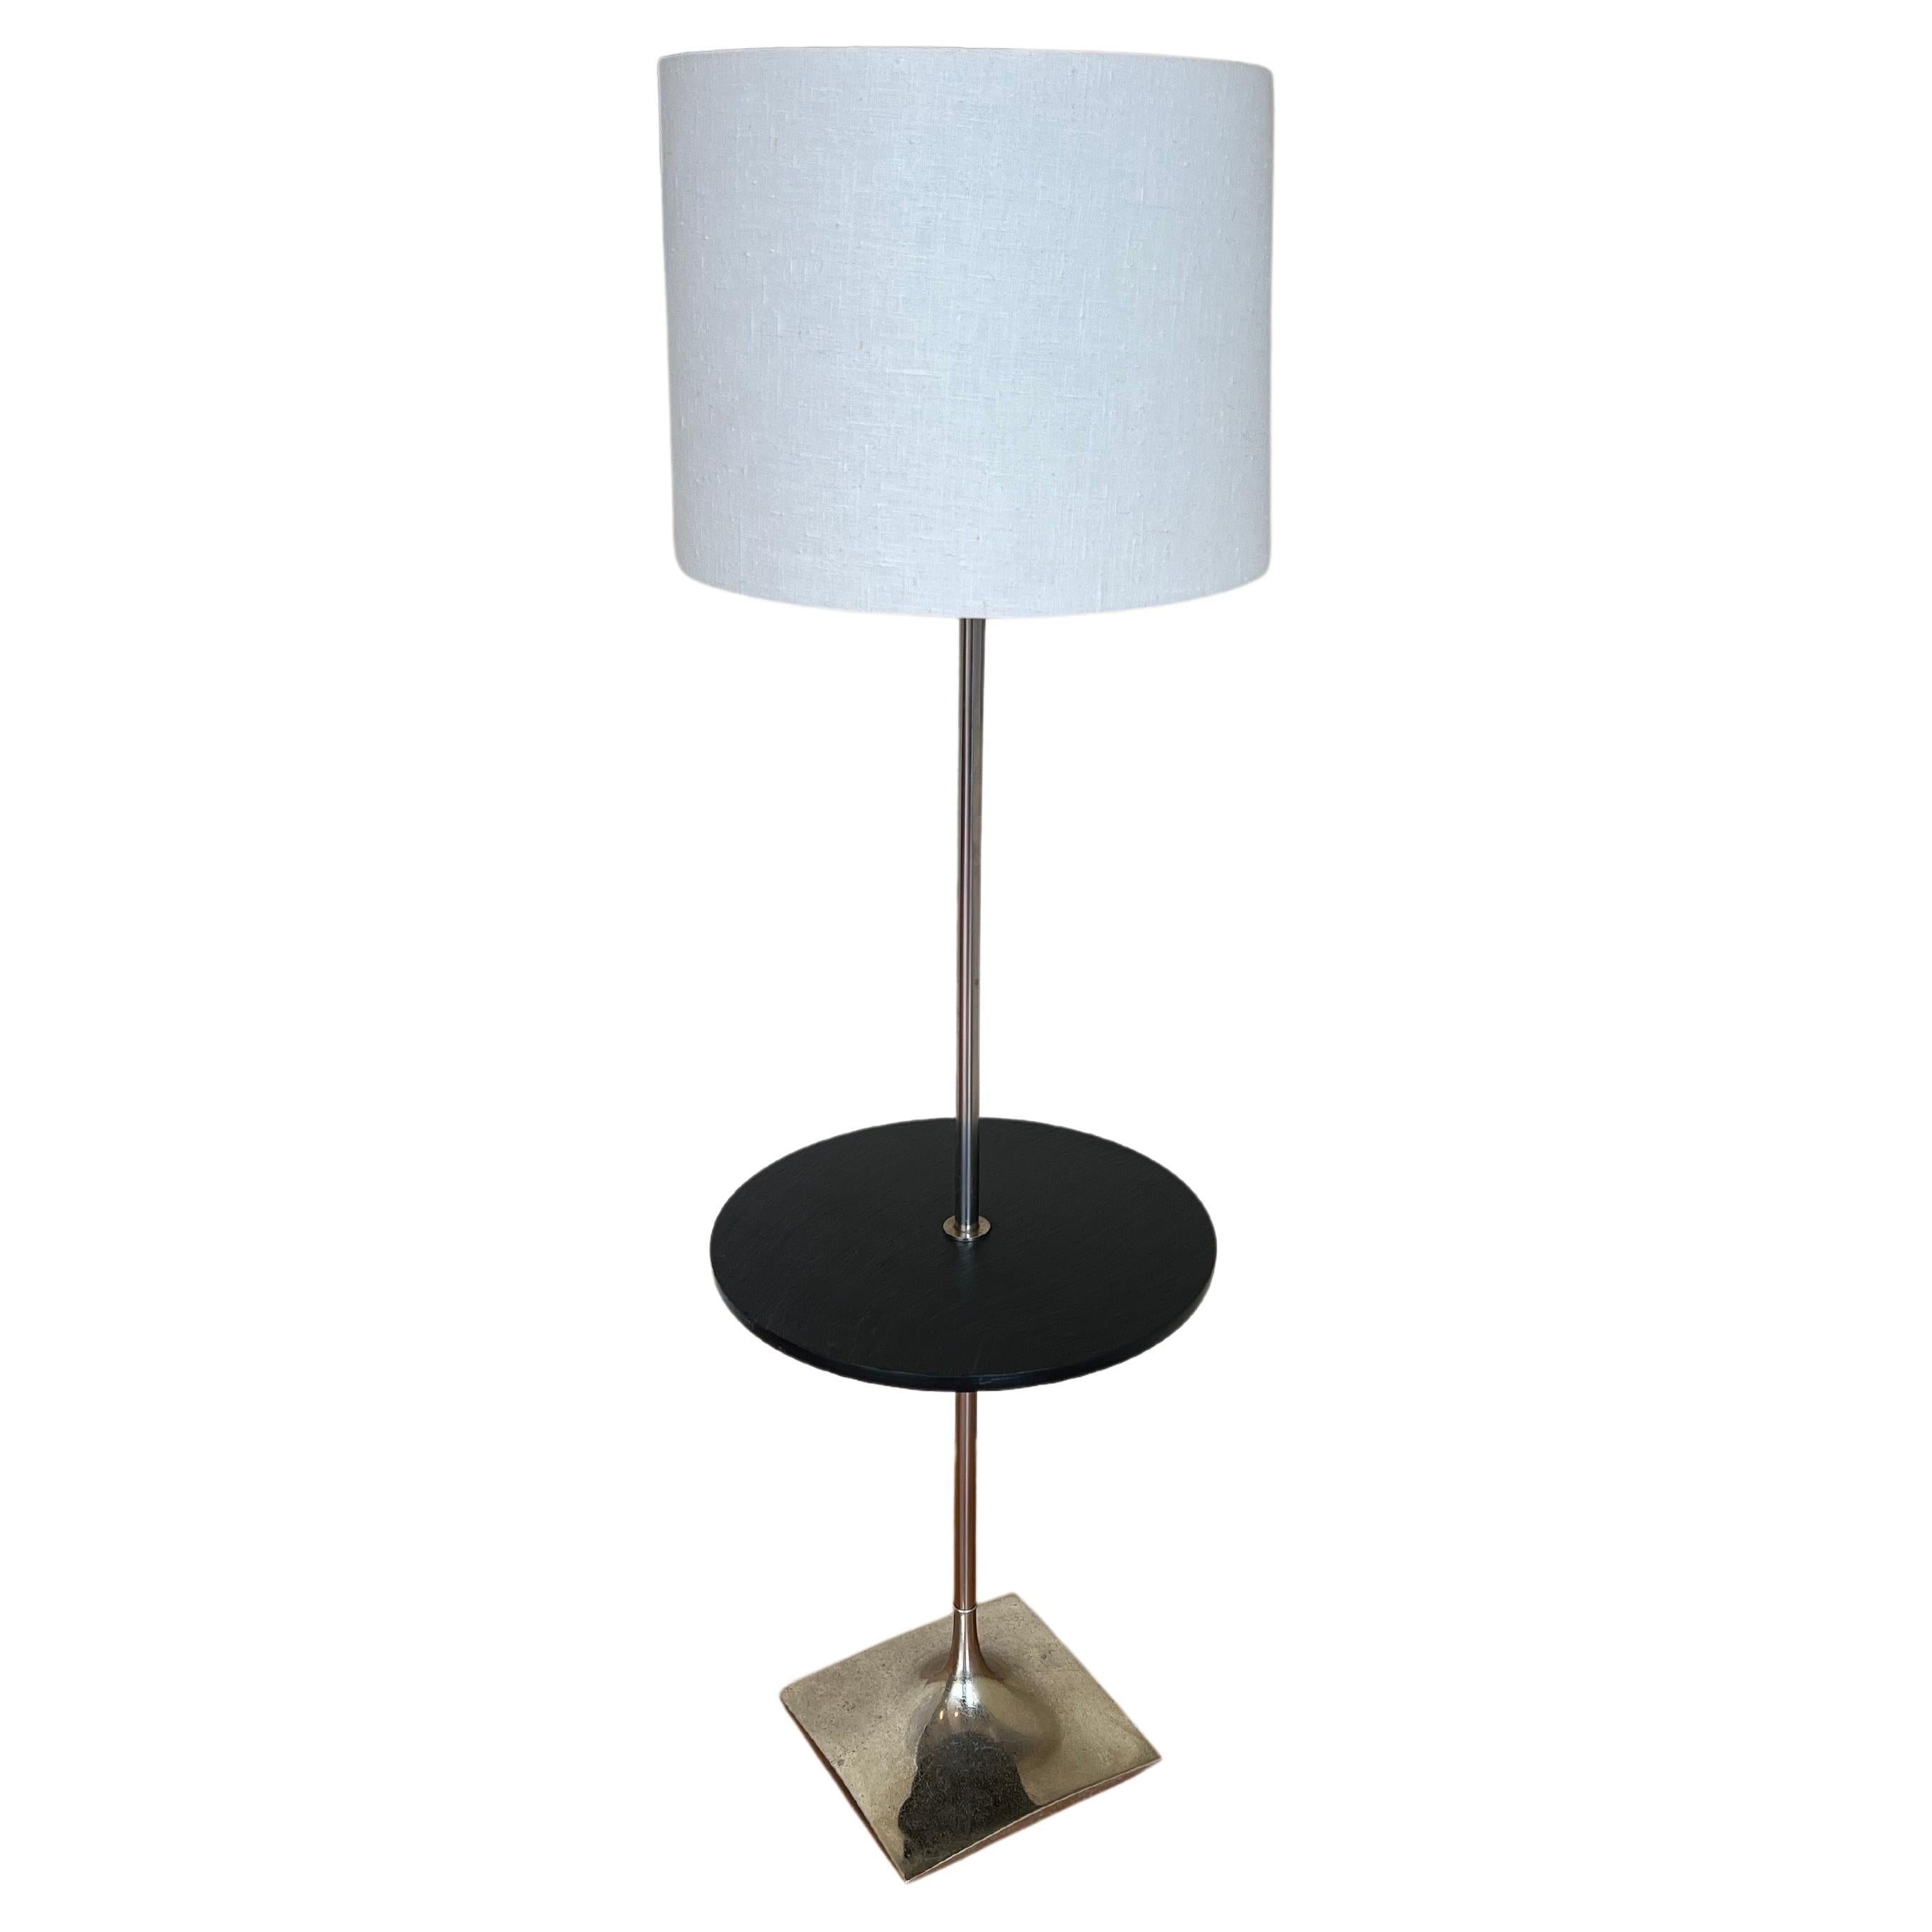 Beautiful and rare floor table lamp by Laurel Co. circa 1970s with slate table, space-age shape, all original condition lamp shade its not included because of condition. 47